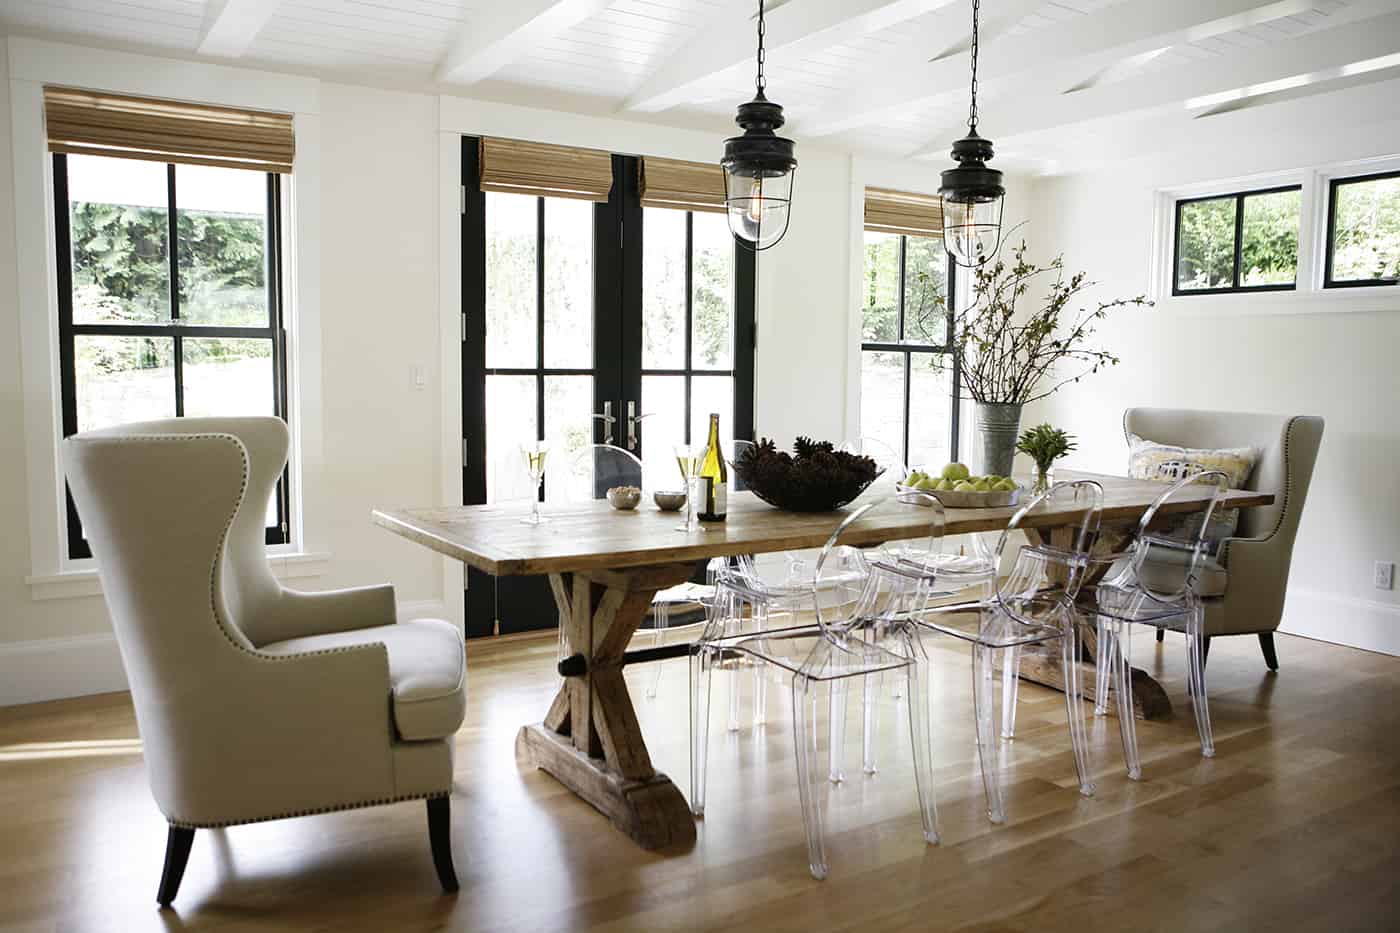 Give Your Home the Rustic Chic Twist You Have Always Wanted with These Rustic Style Ideas